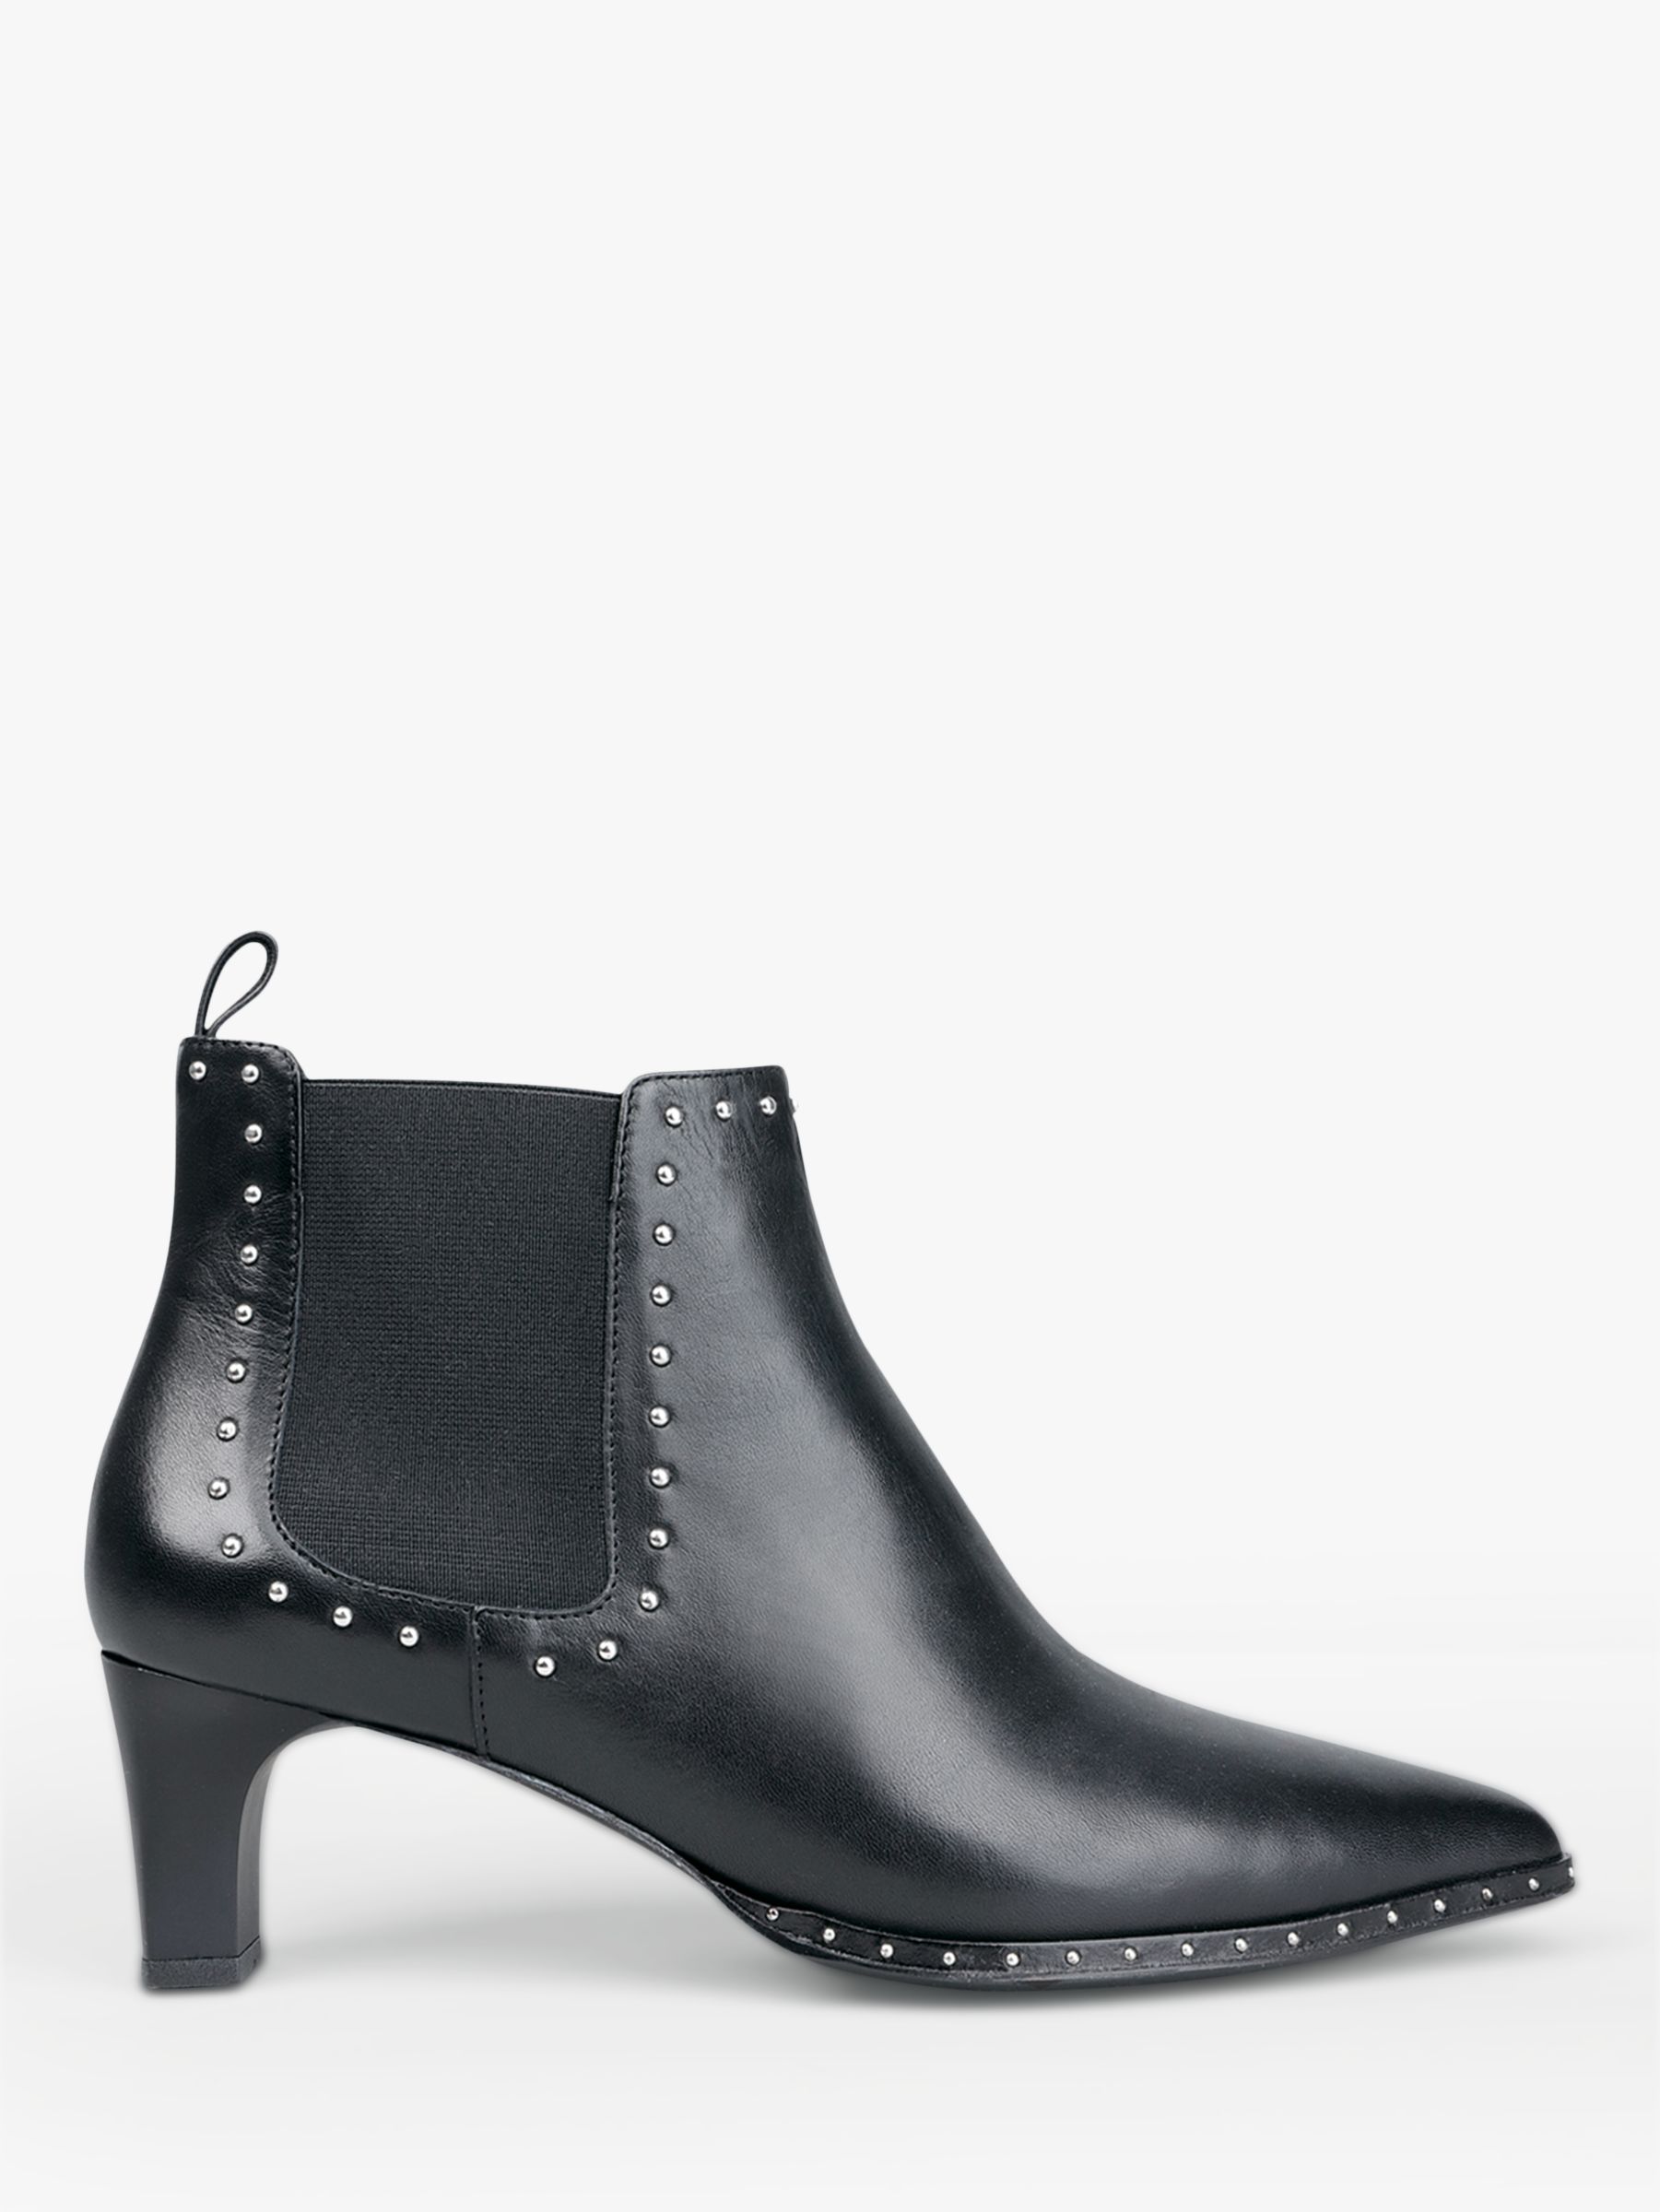 black ankle boots silver studs